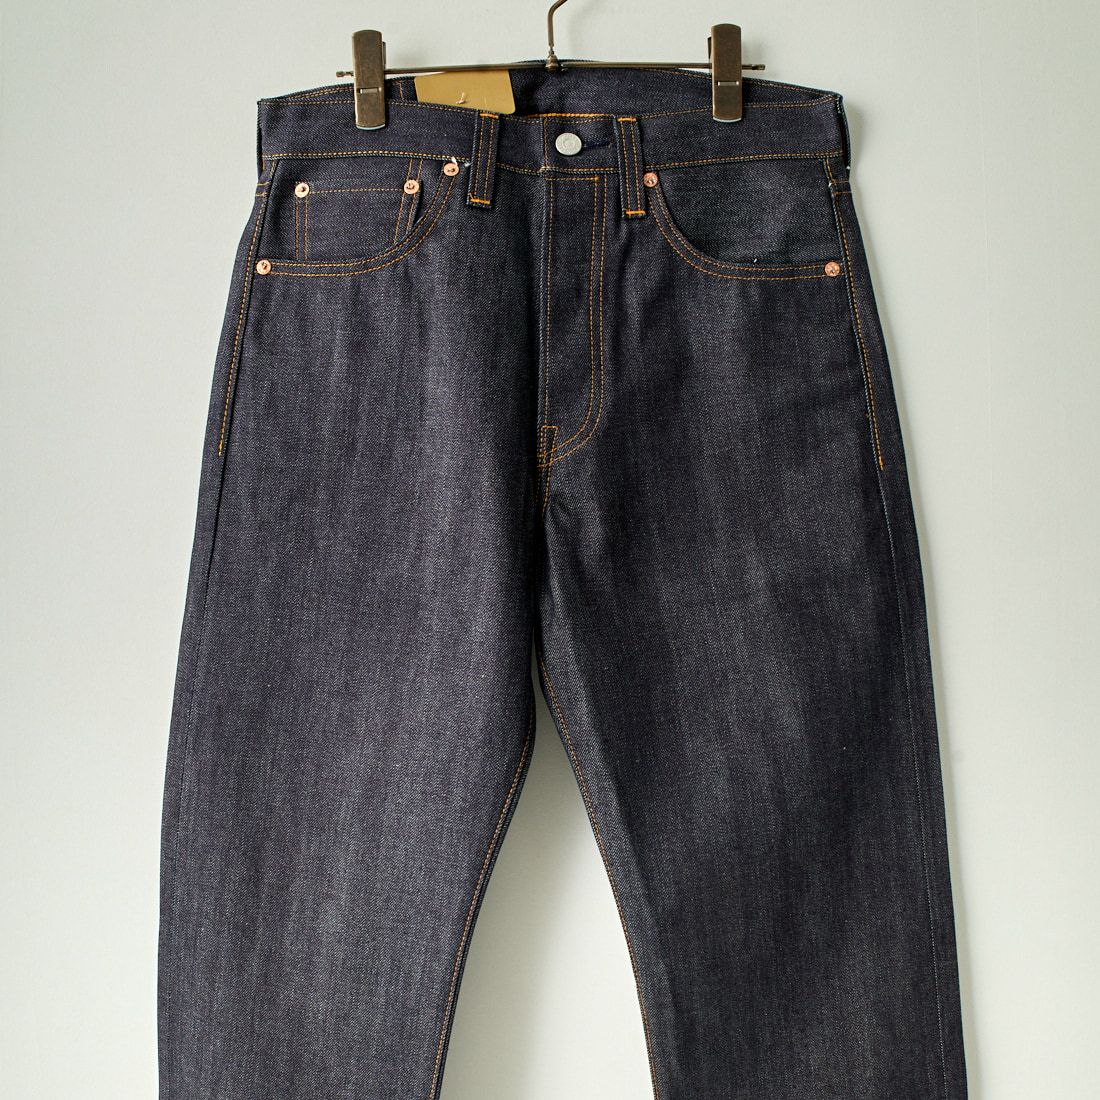 LEVIS Vintage Clothing [リーバイス ヴィンテージ クロージング] 1947年モデル501 [47501-02]